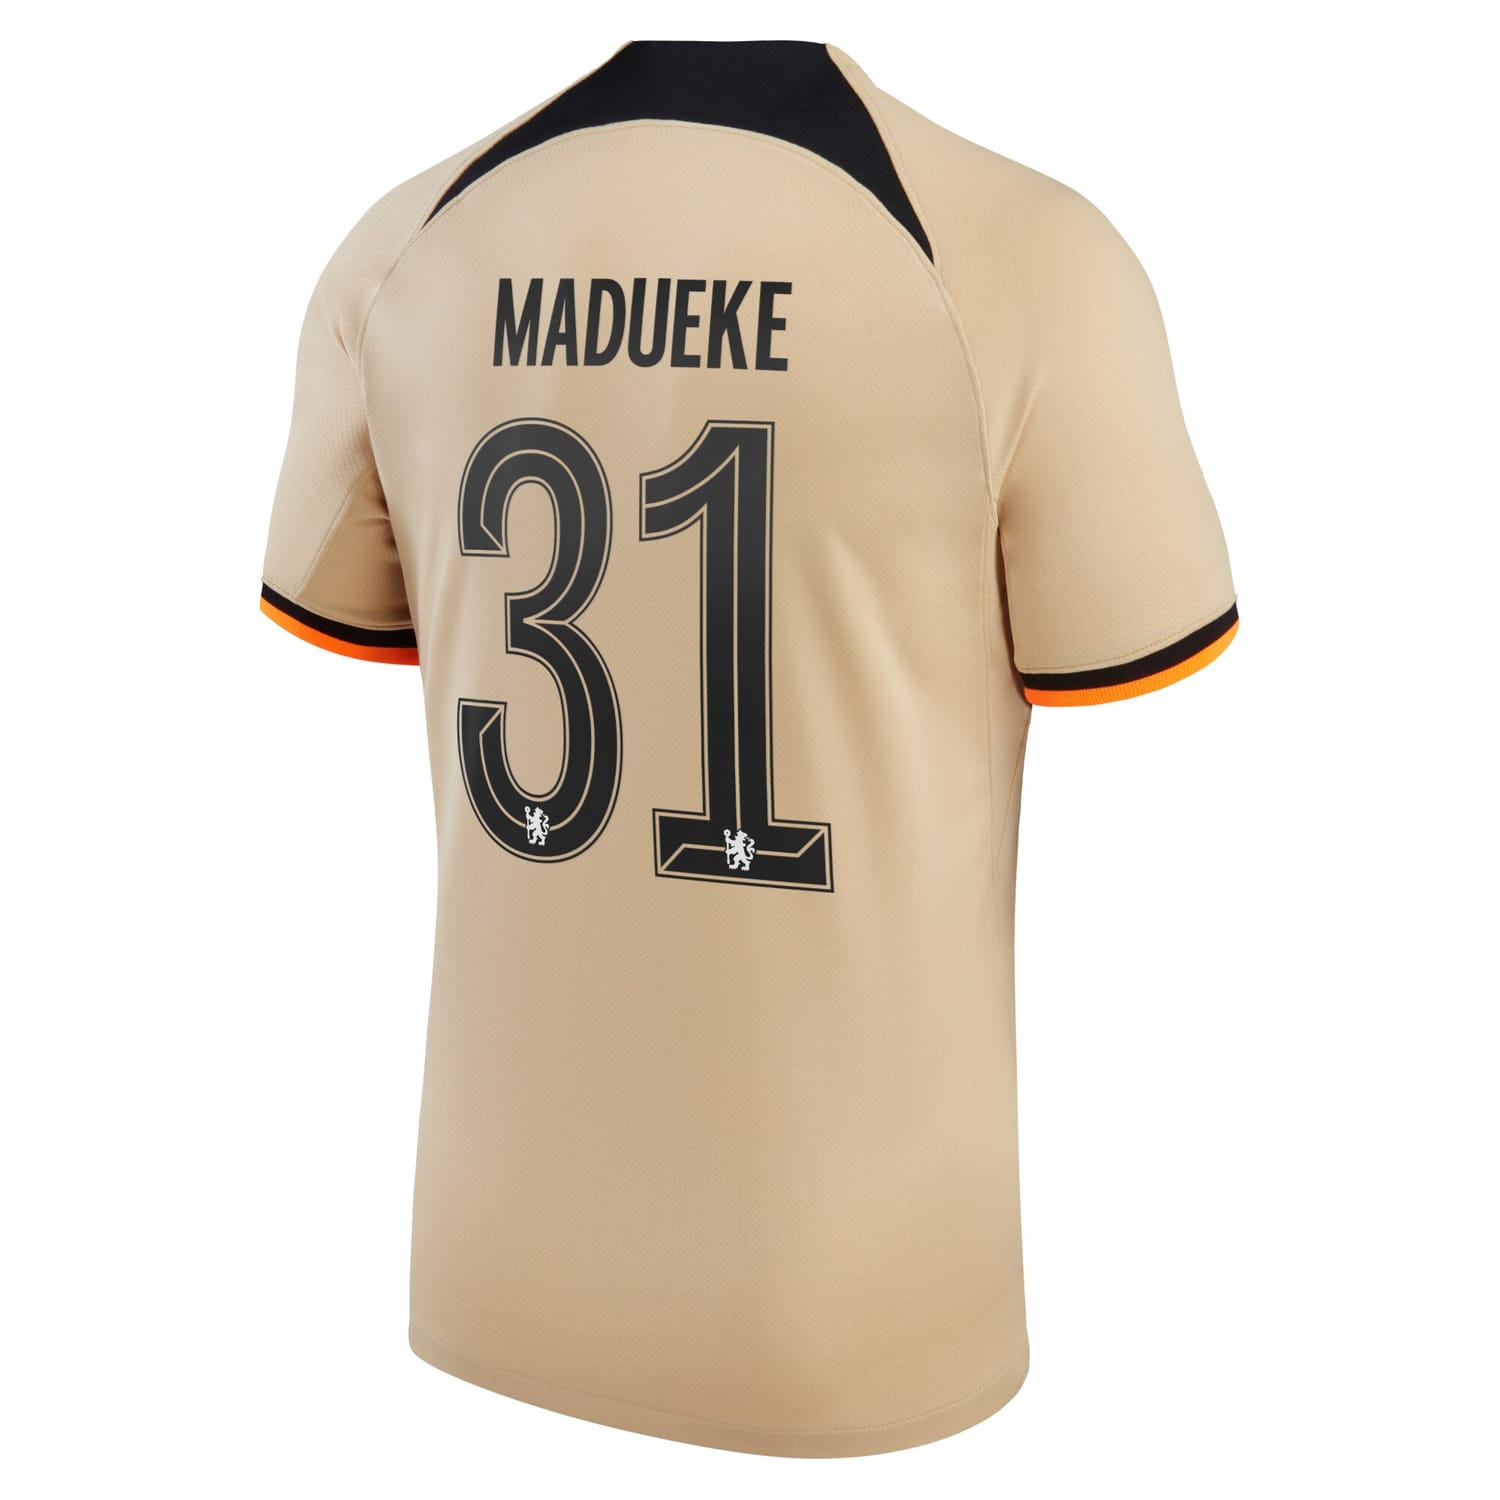 Premier League Chelsea Third Cup Jersey Shirt 2022-23 player Noni Madueke 31 printing for Men